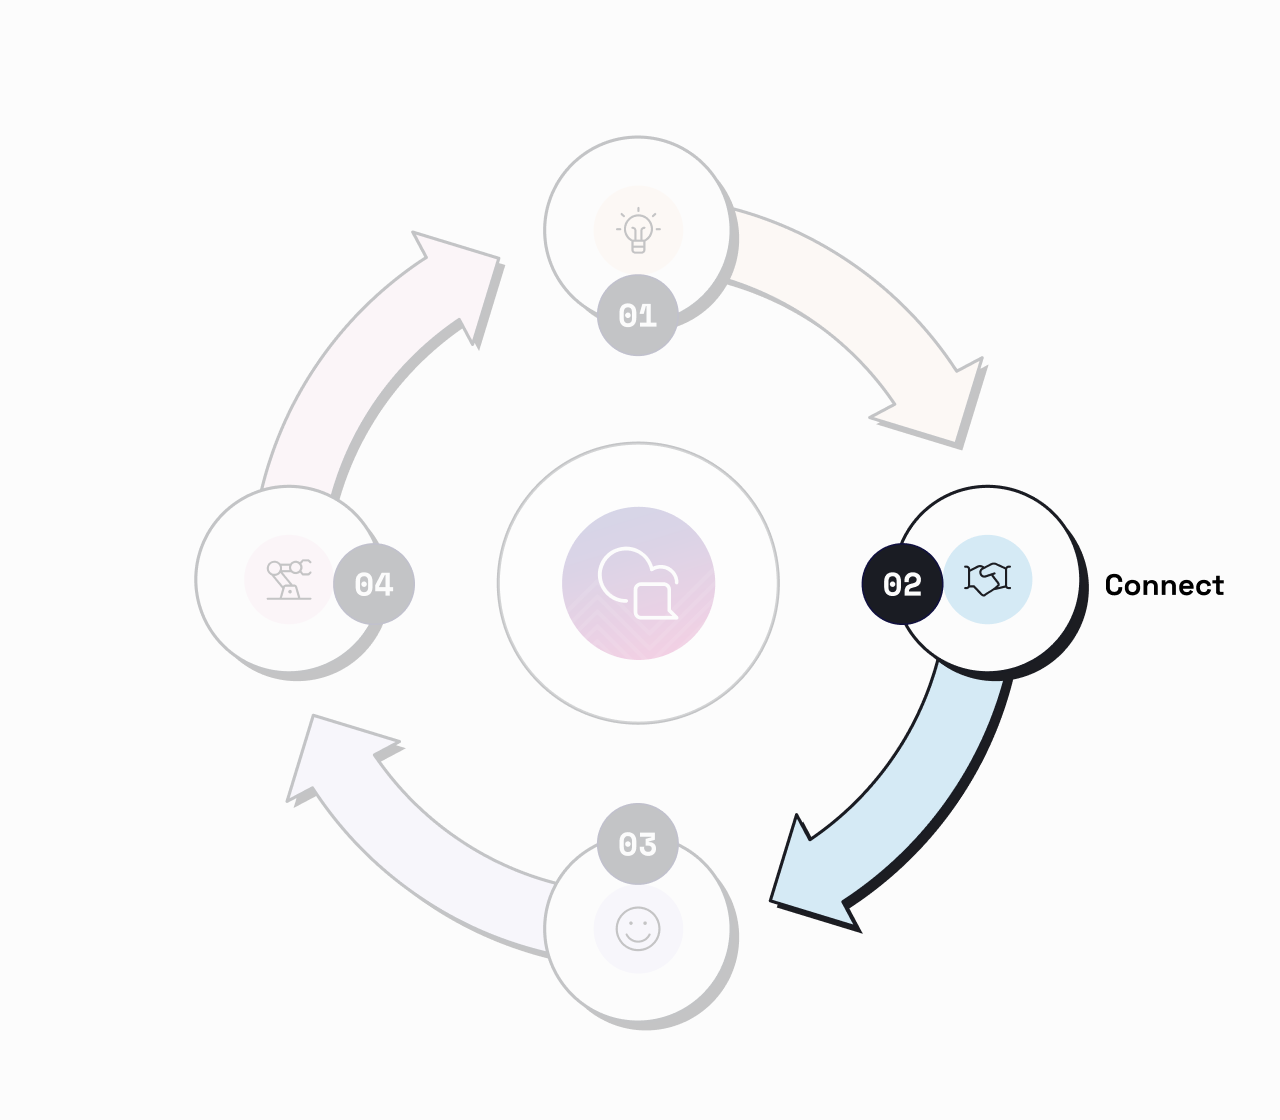 Connect stage of the Conversational Flywheel, showing how omnichannel CCaaS solutions can expand customer engagement